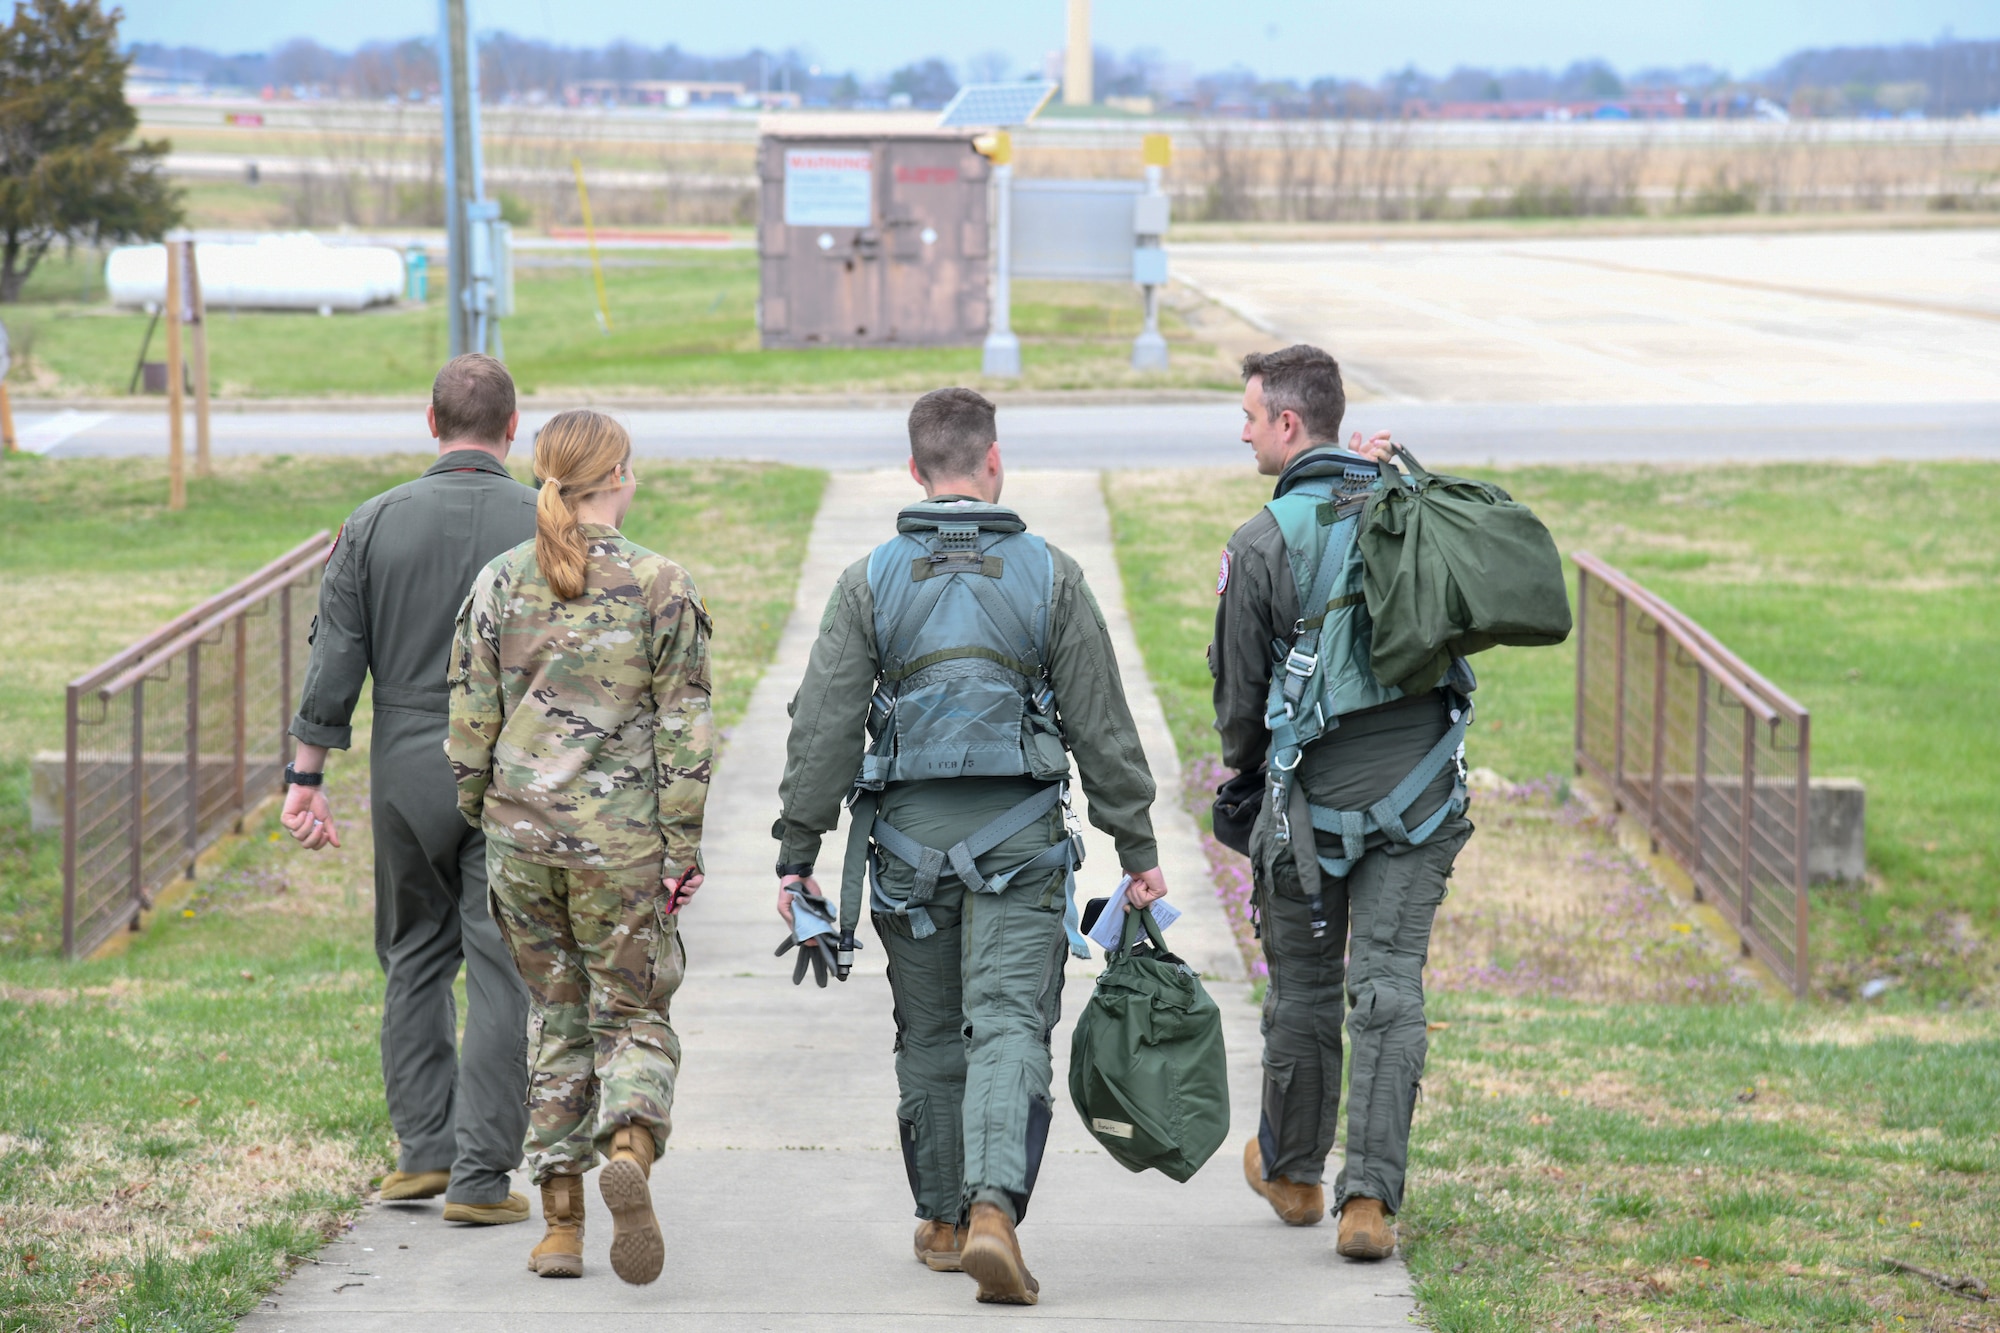 Cadets from the Georgetown University Army ROTC program, also known as the Hoya Battalion, visited Joint Base Andrews, March 31, 2022. They were fitted for flight equipment and flew in the backseat of F-16s from the 113th Wing, D.C. Air National Guard.